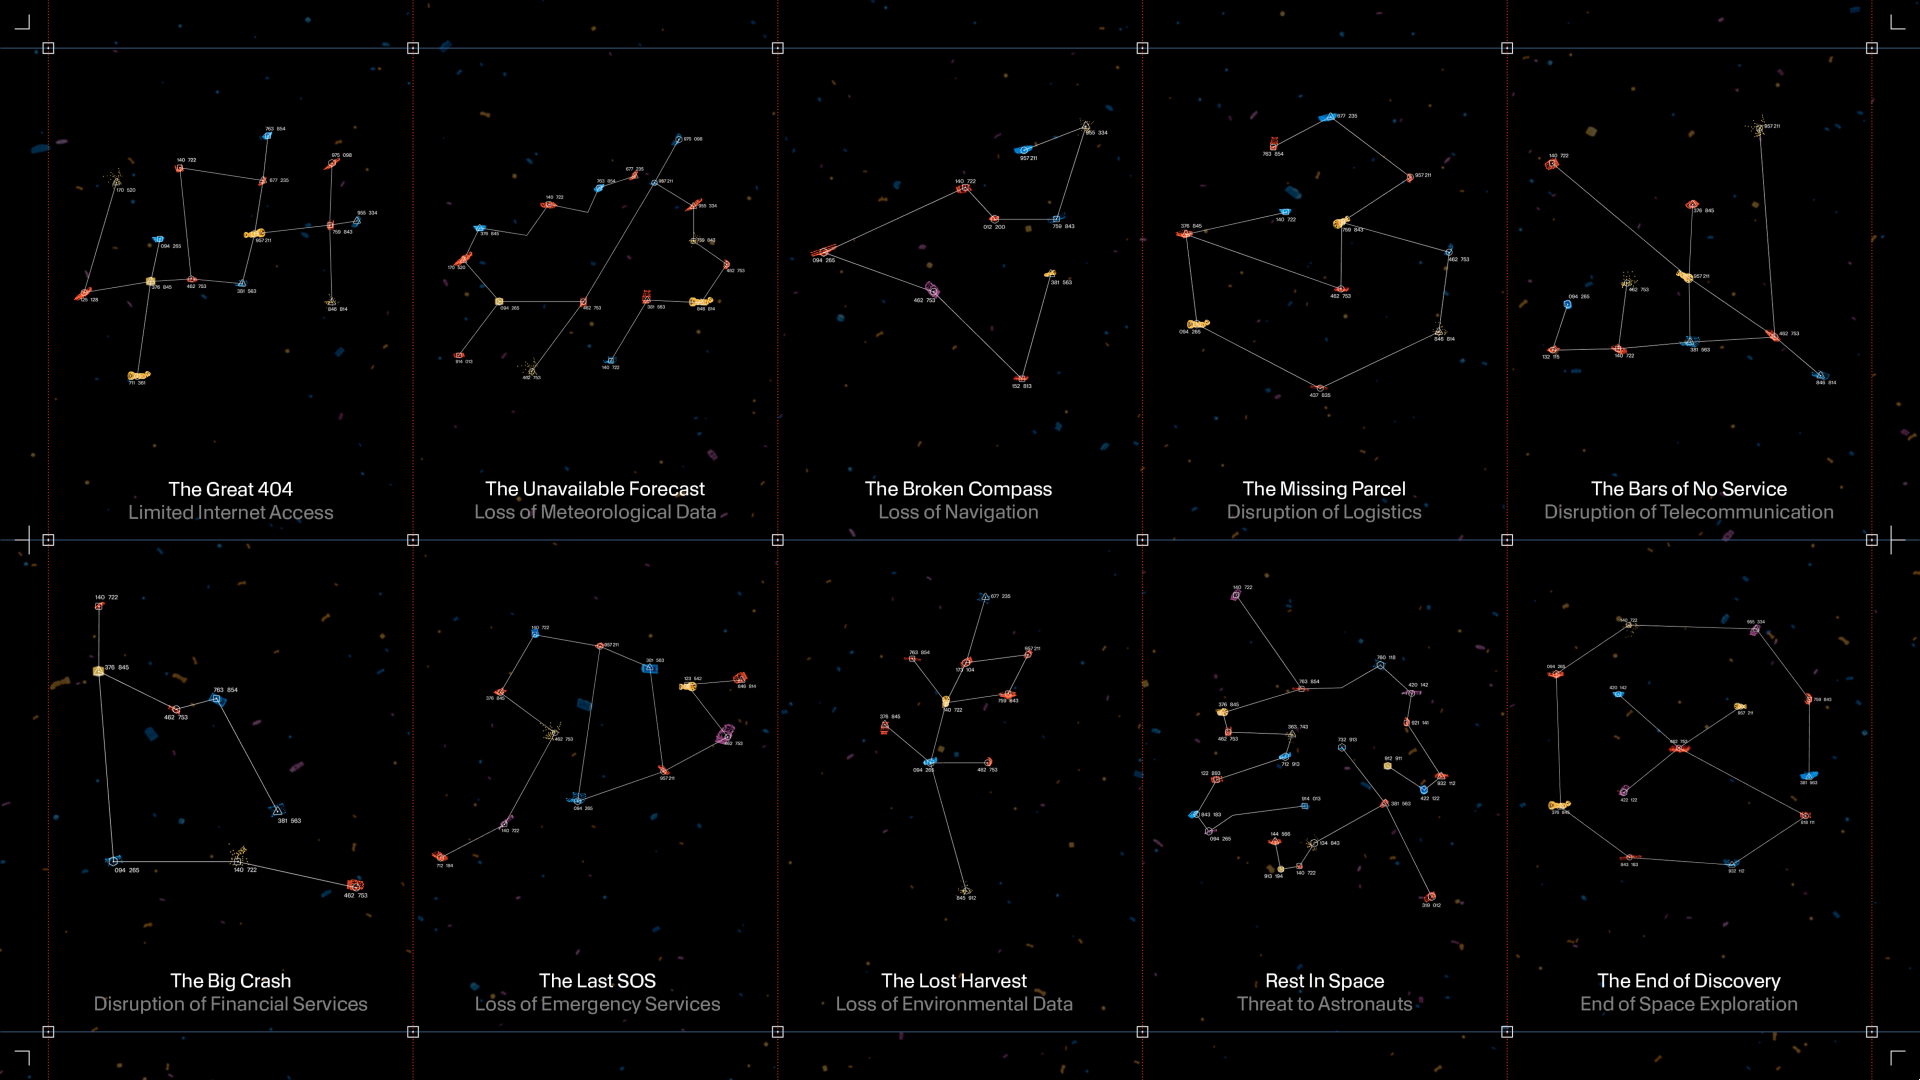 Illustration of various constellations made of space debris